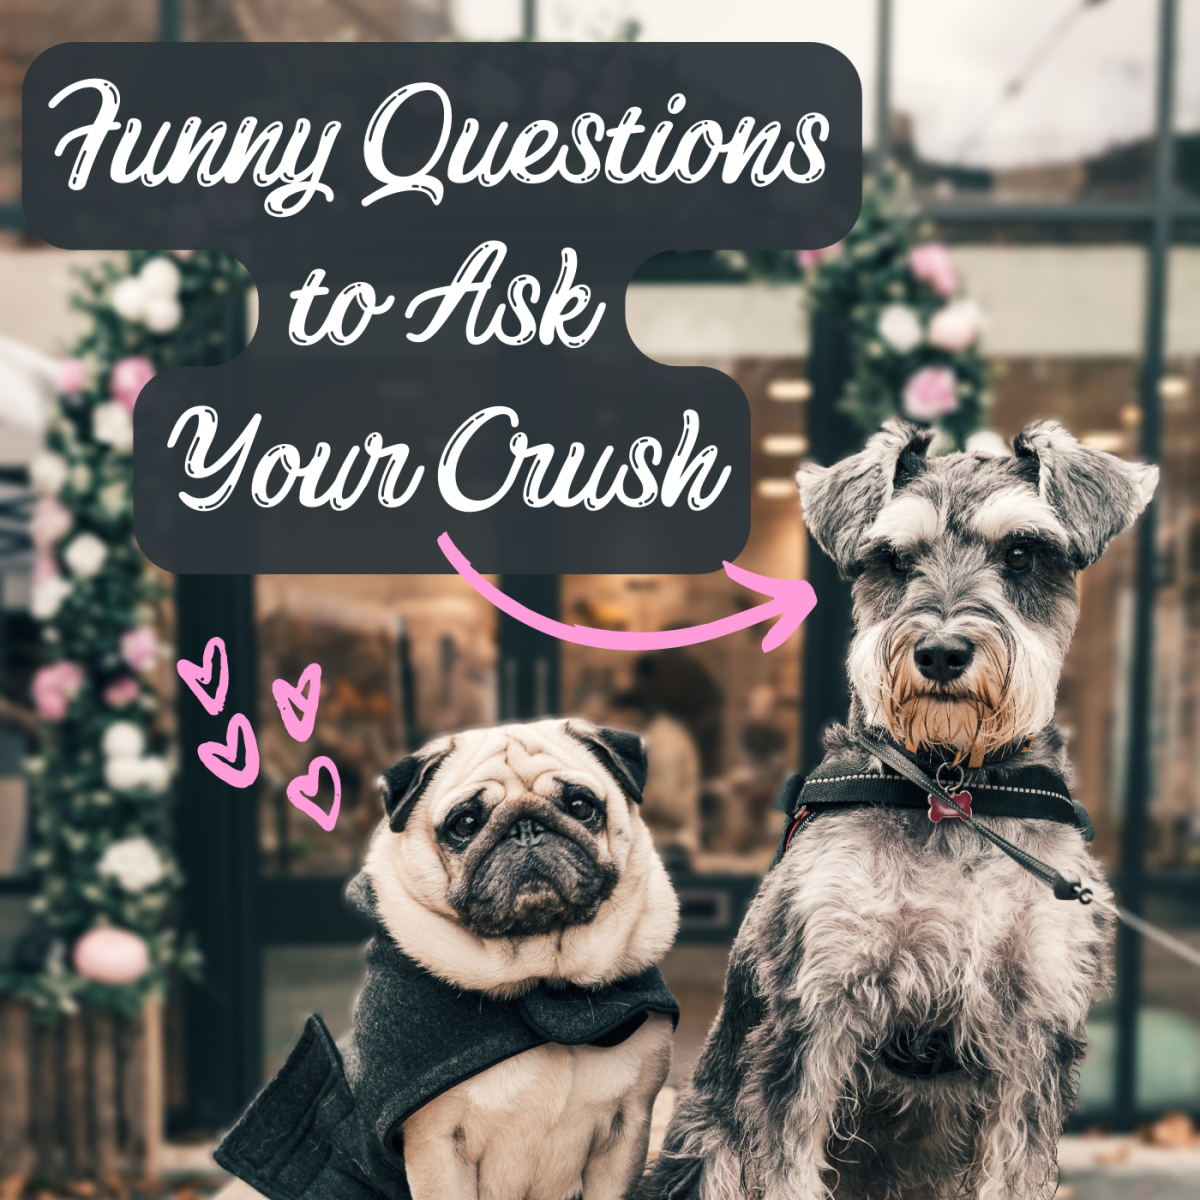 100+ Funny Questions to Ask Your Crush